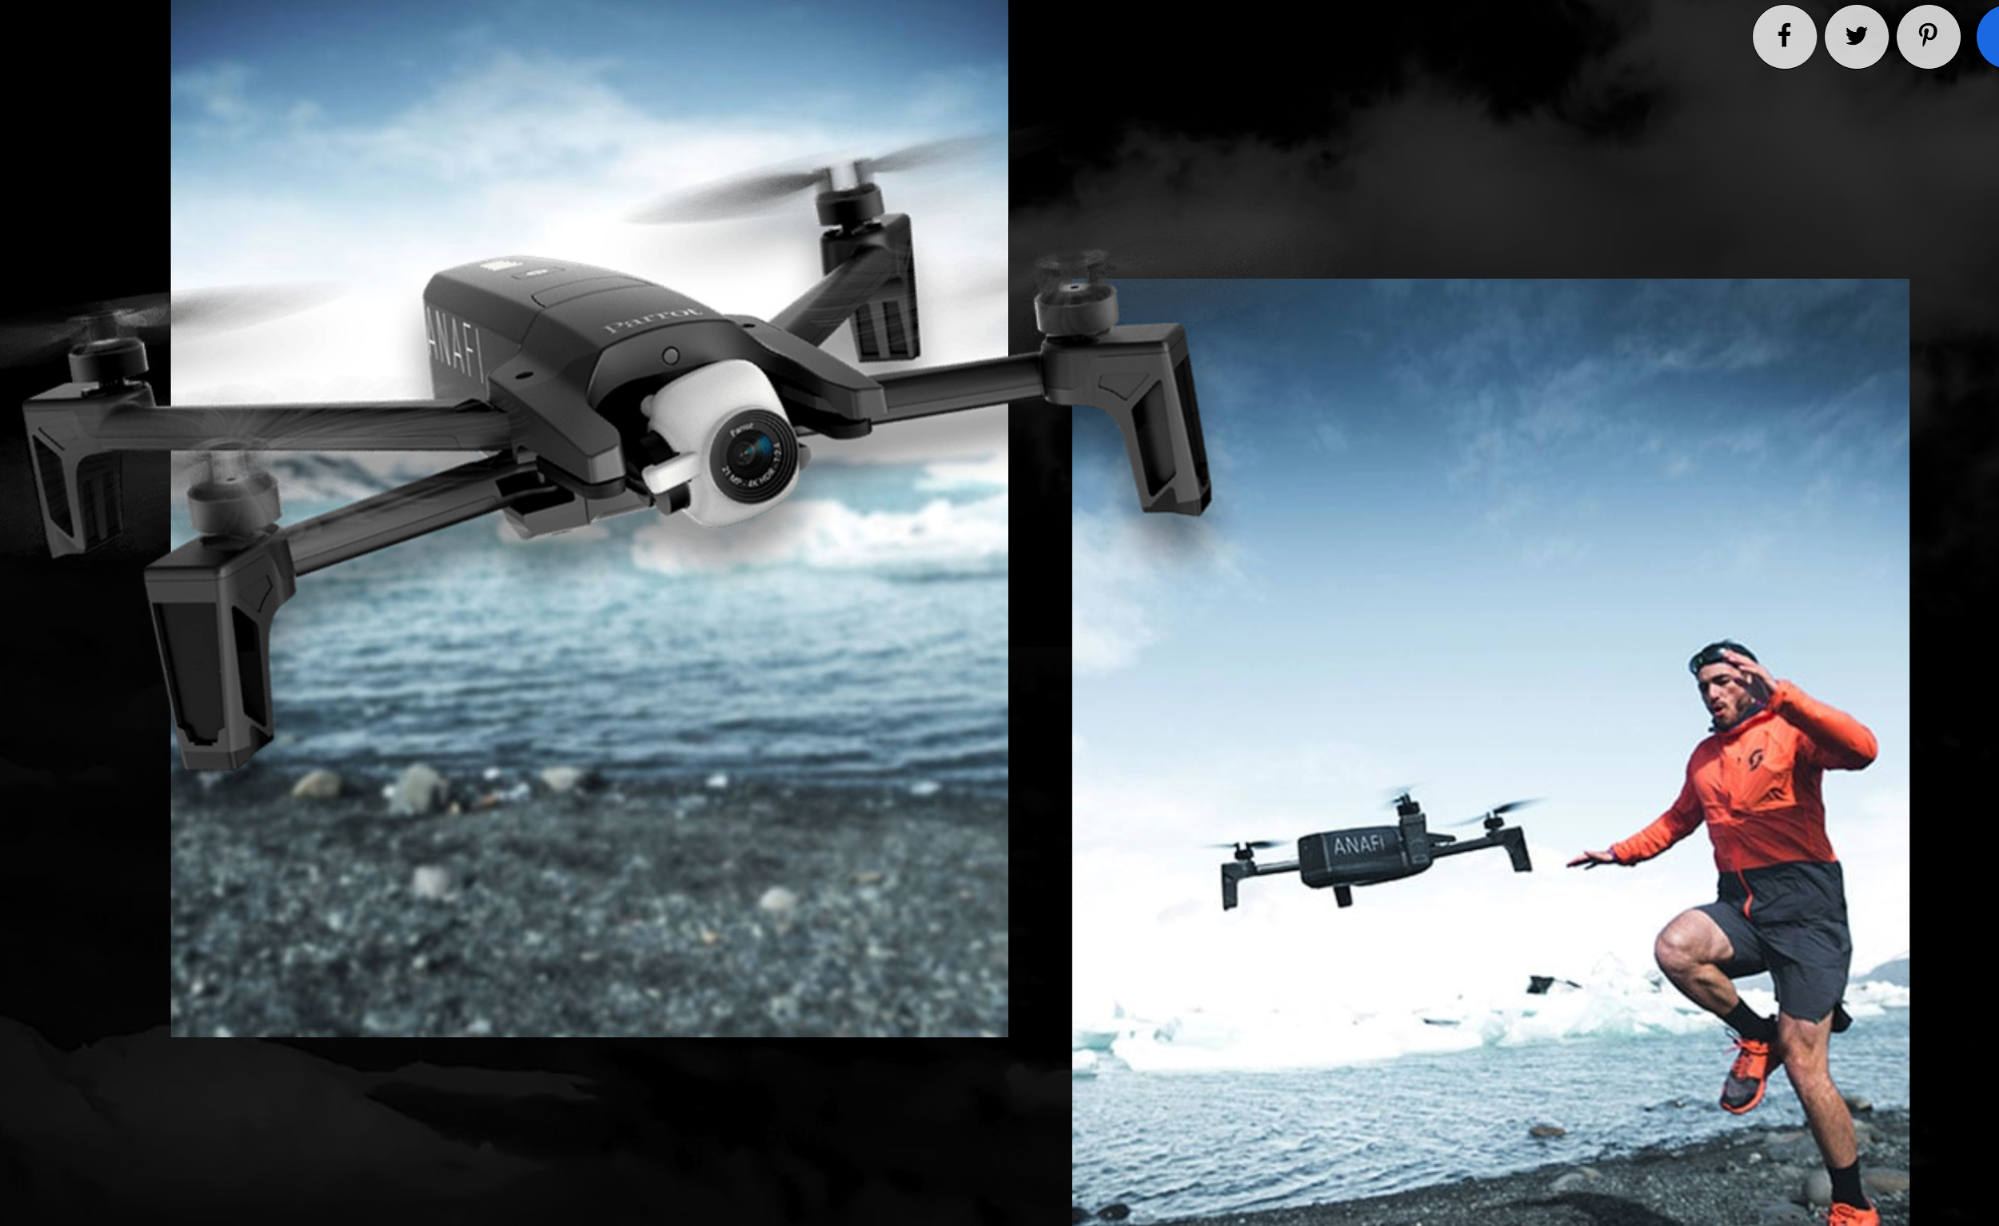 The drone moves faster than the images to create the parallax effect when scrolling